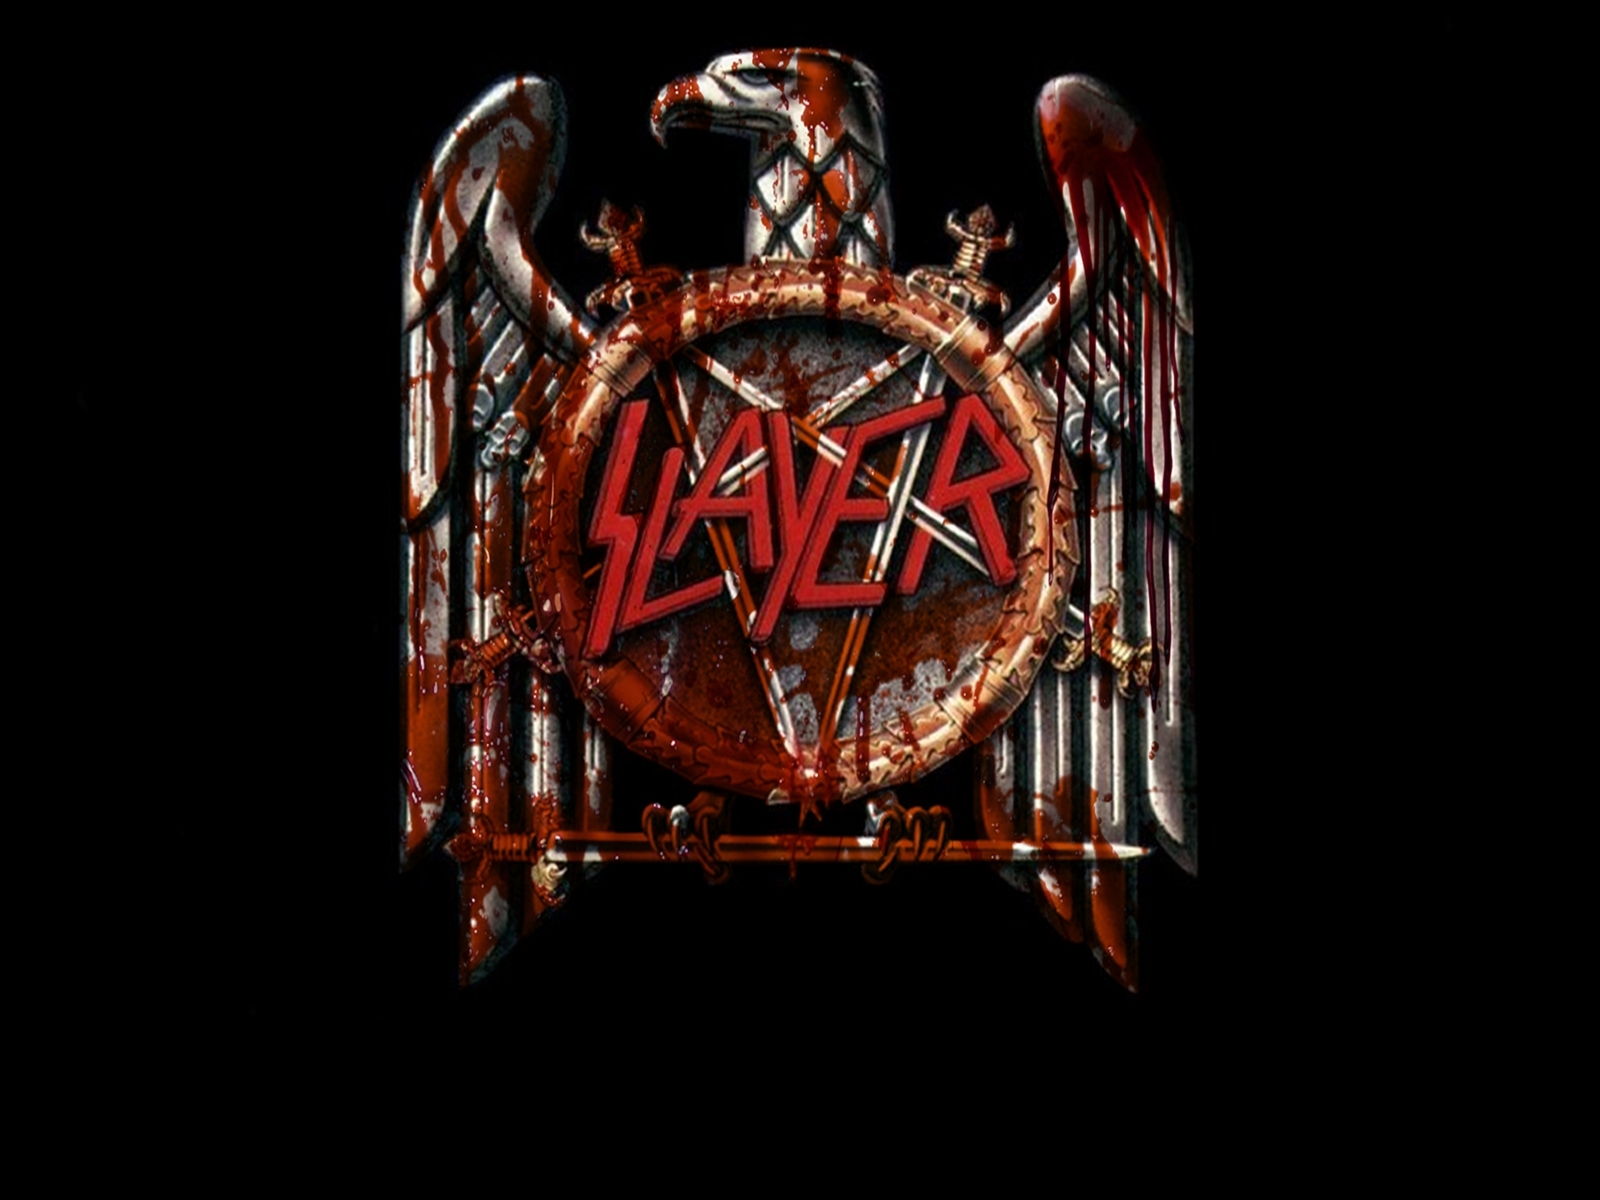 Slayer Groups Bands Music Heavy Metal Death Hard Rock Album Covers